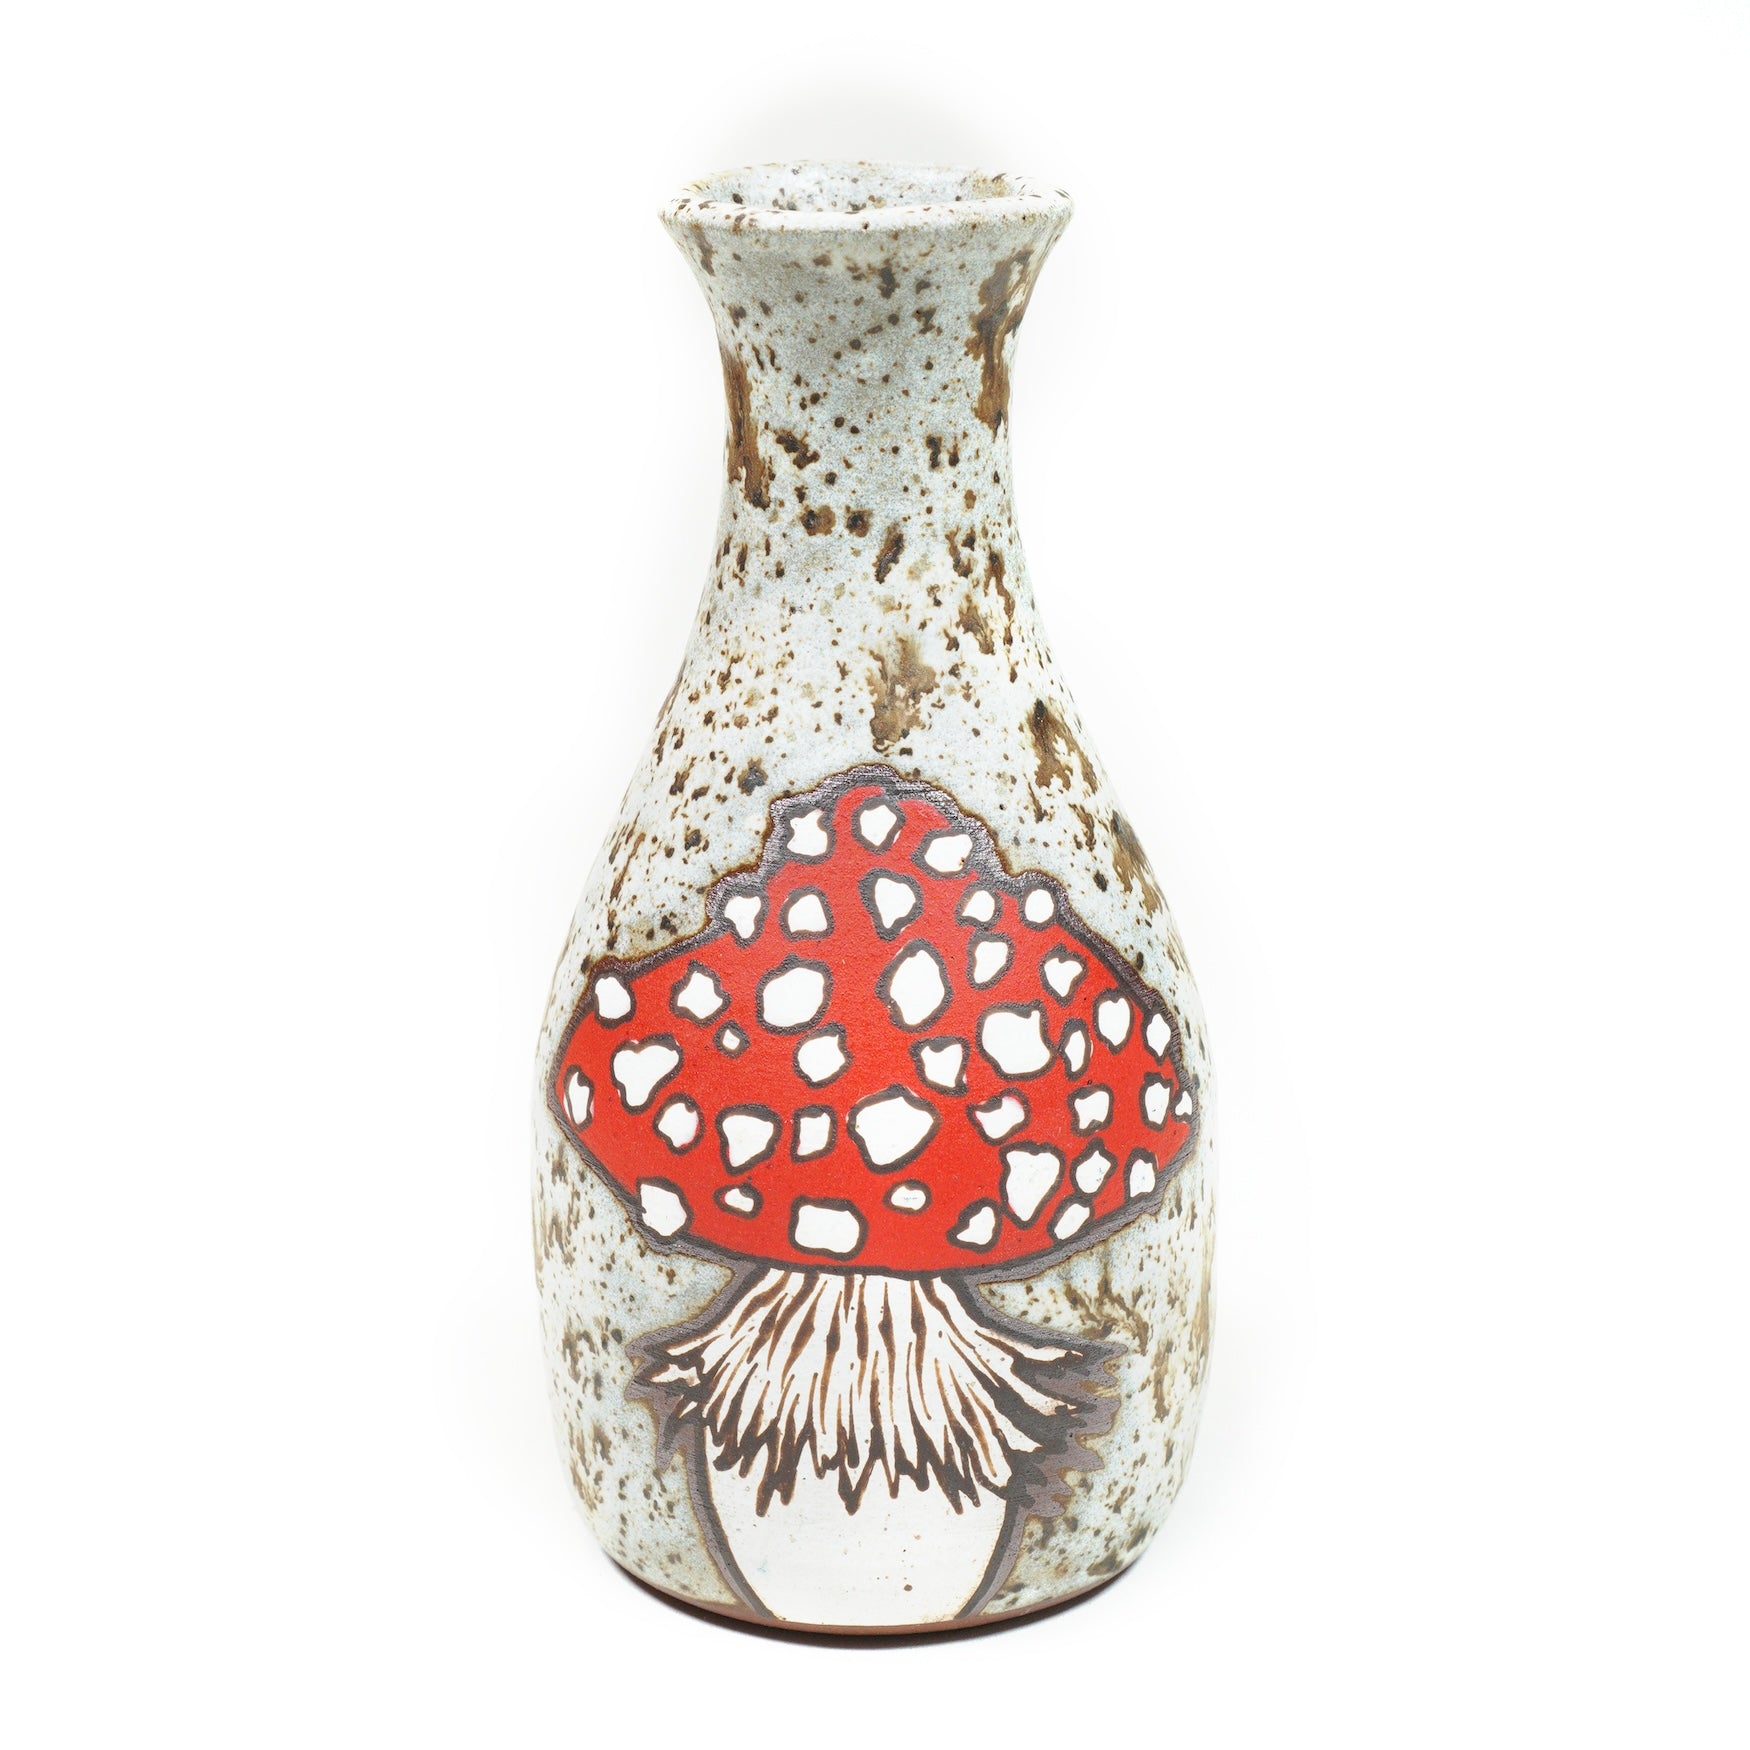 Wheelthrown red Stoneware Bud vase with hand-painted mushroom motif & speckled white glaze